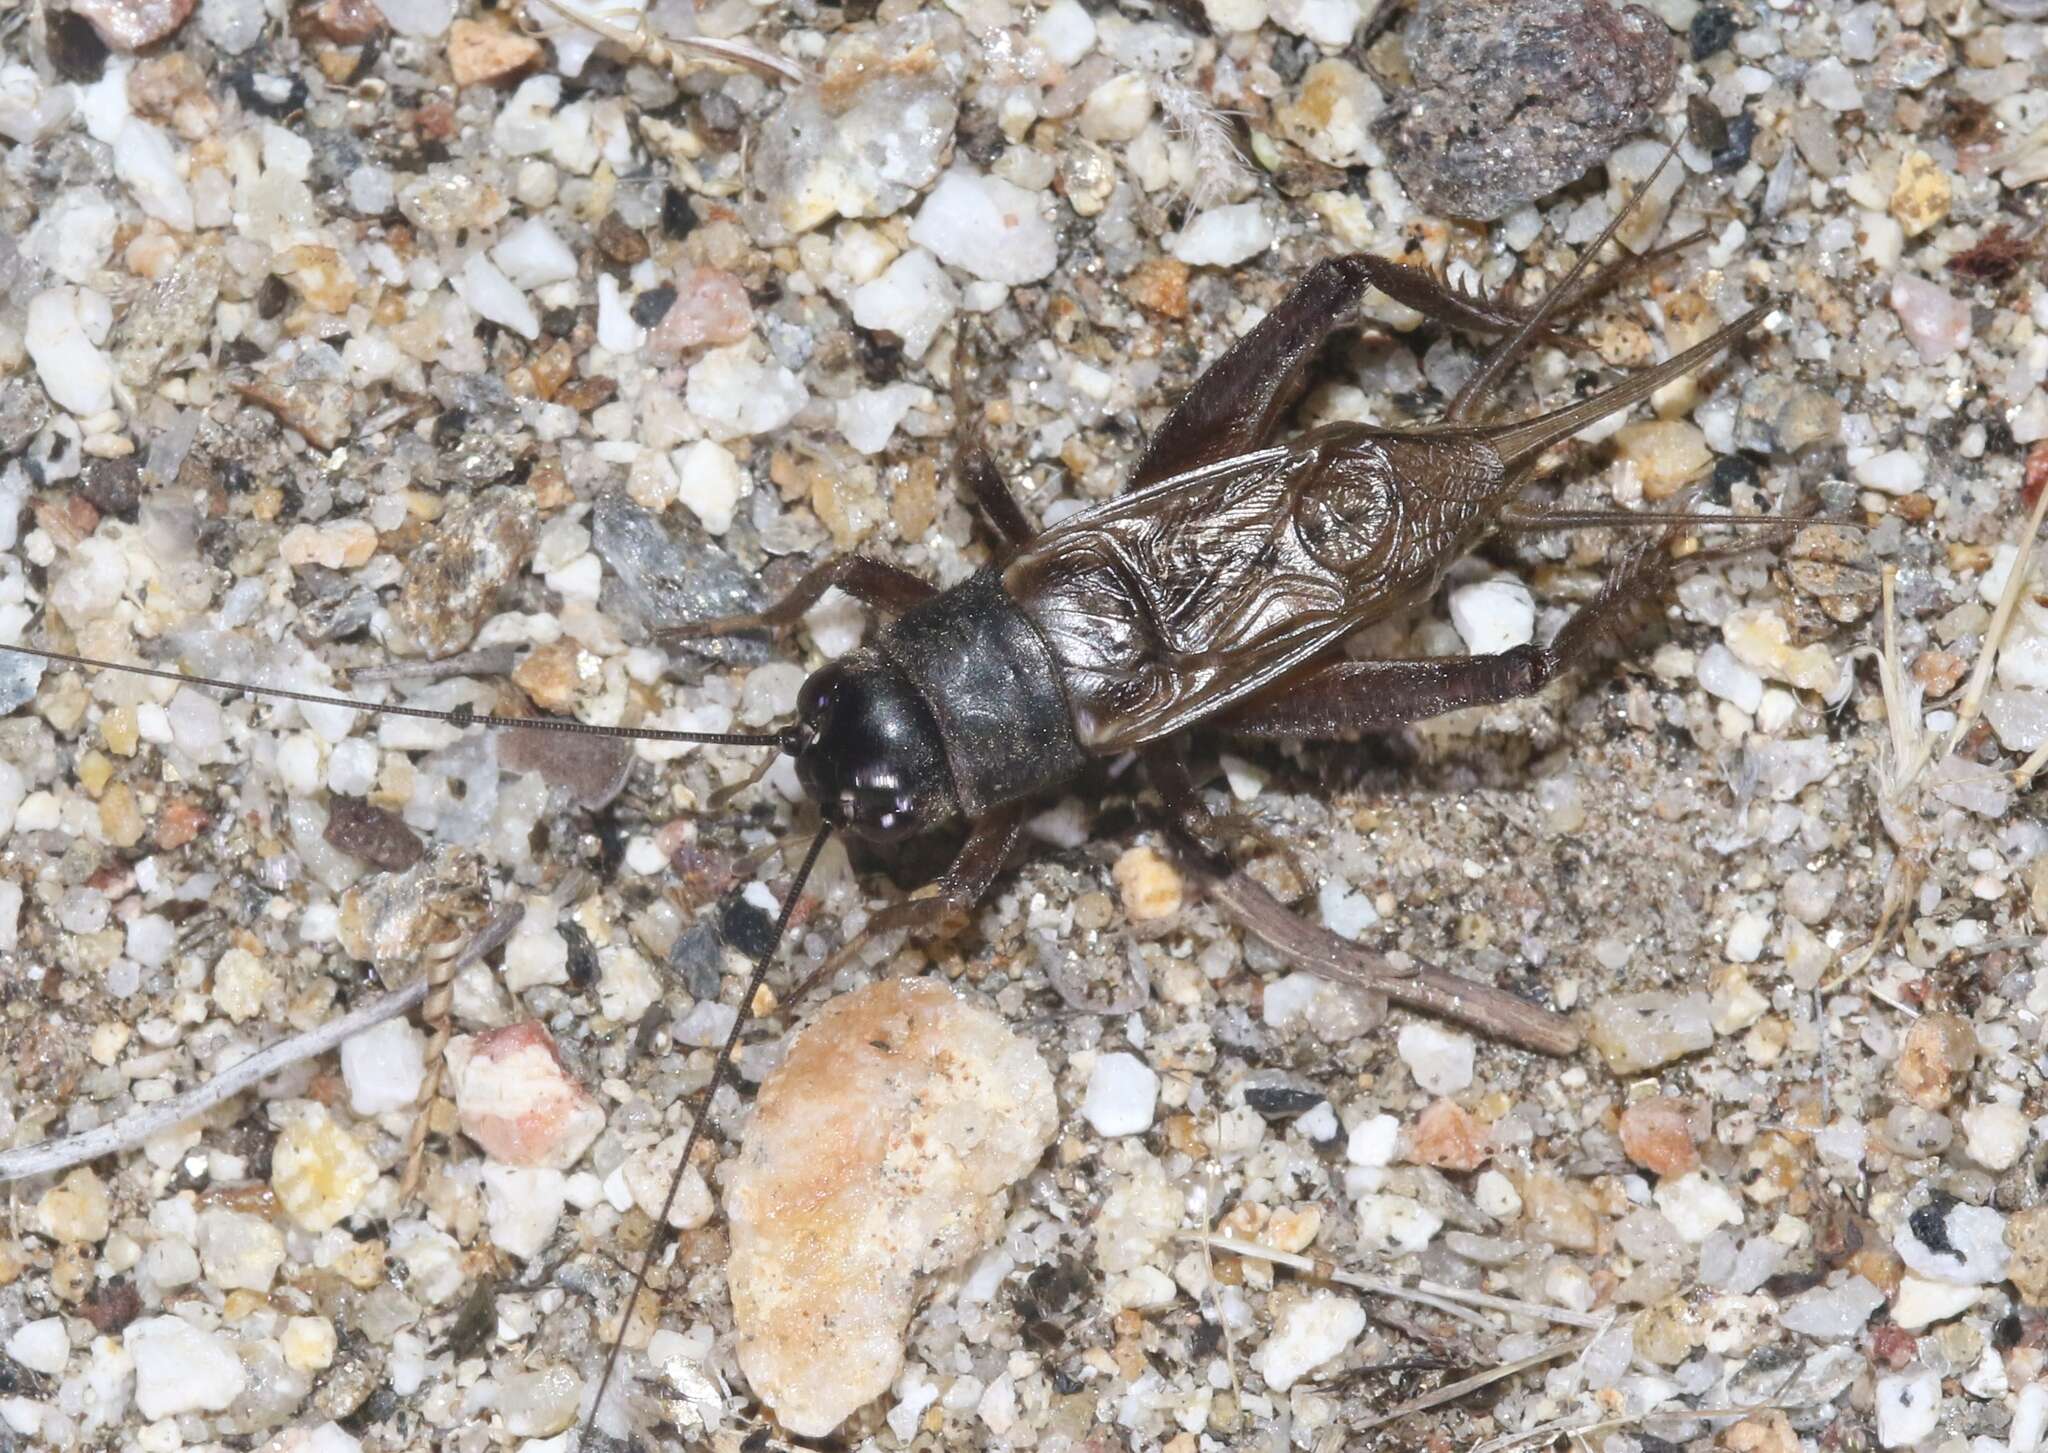 Image of Lone-chirp Field Cricket